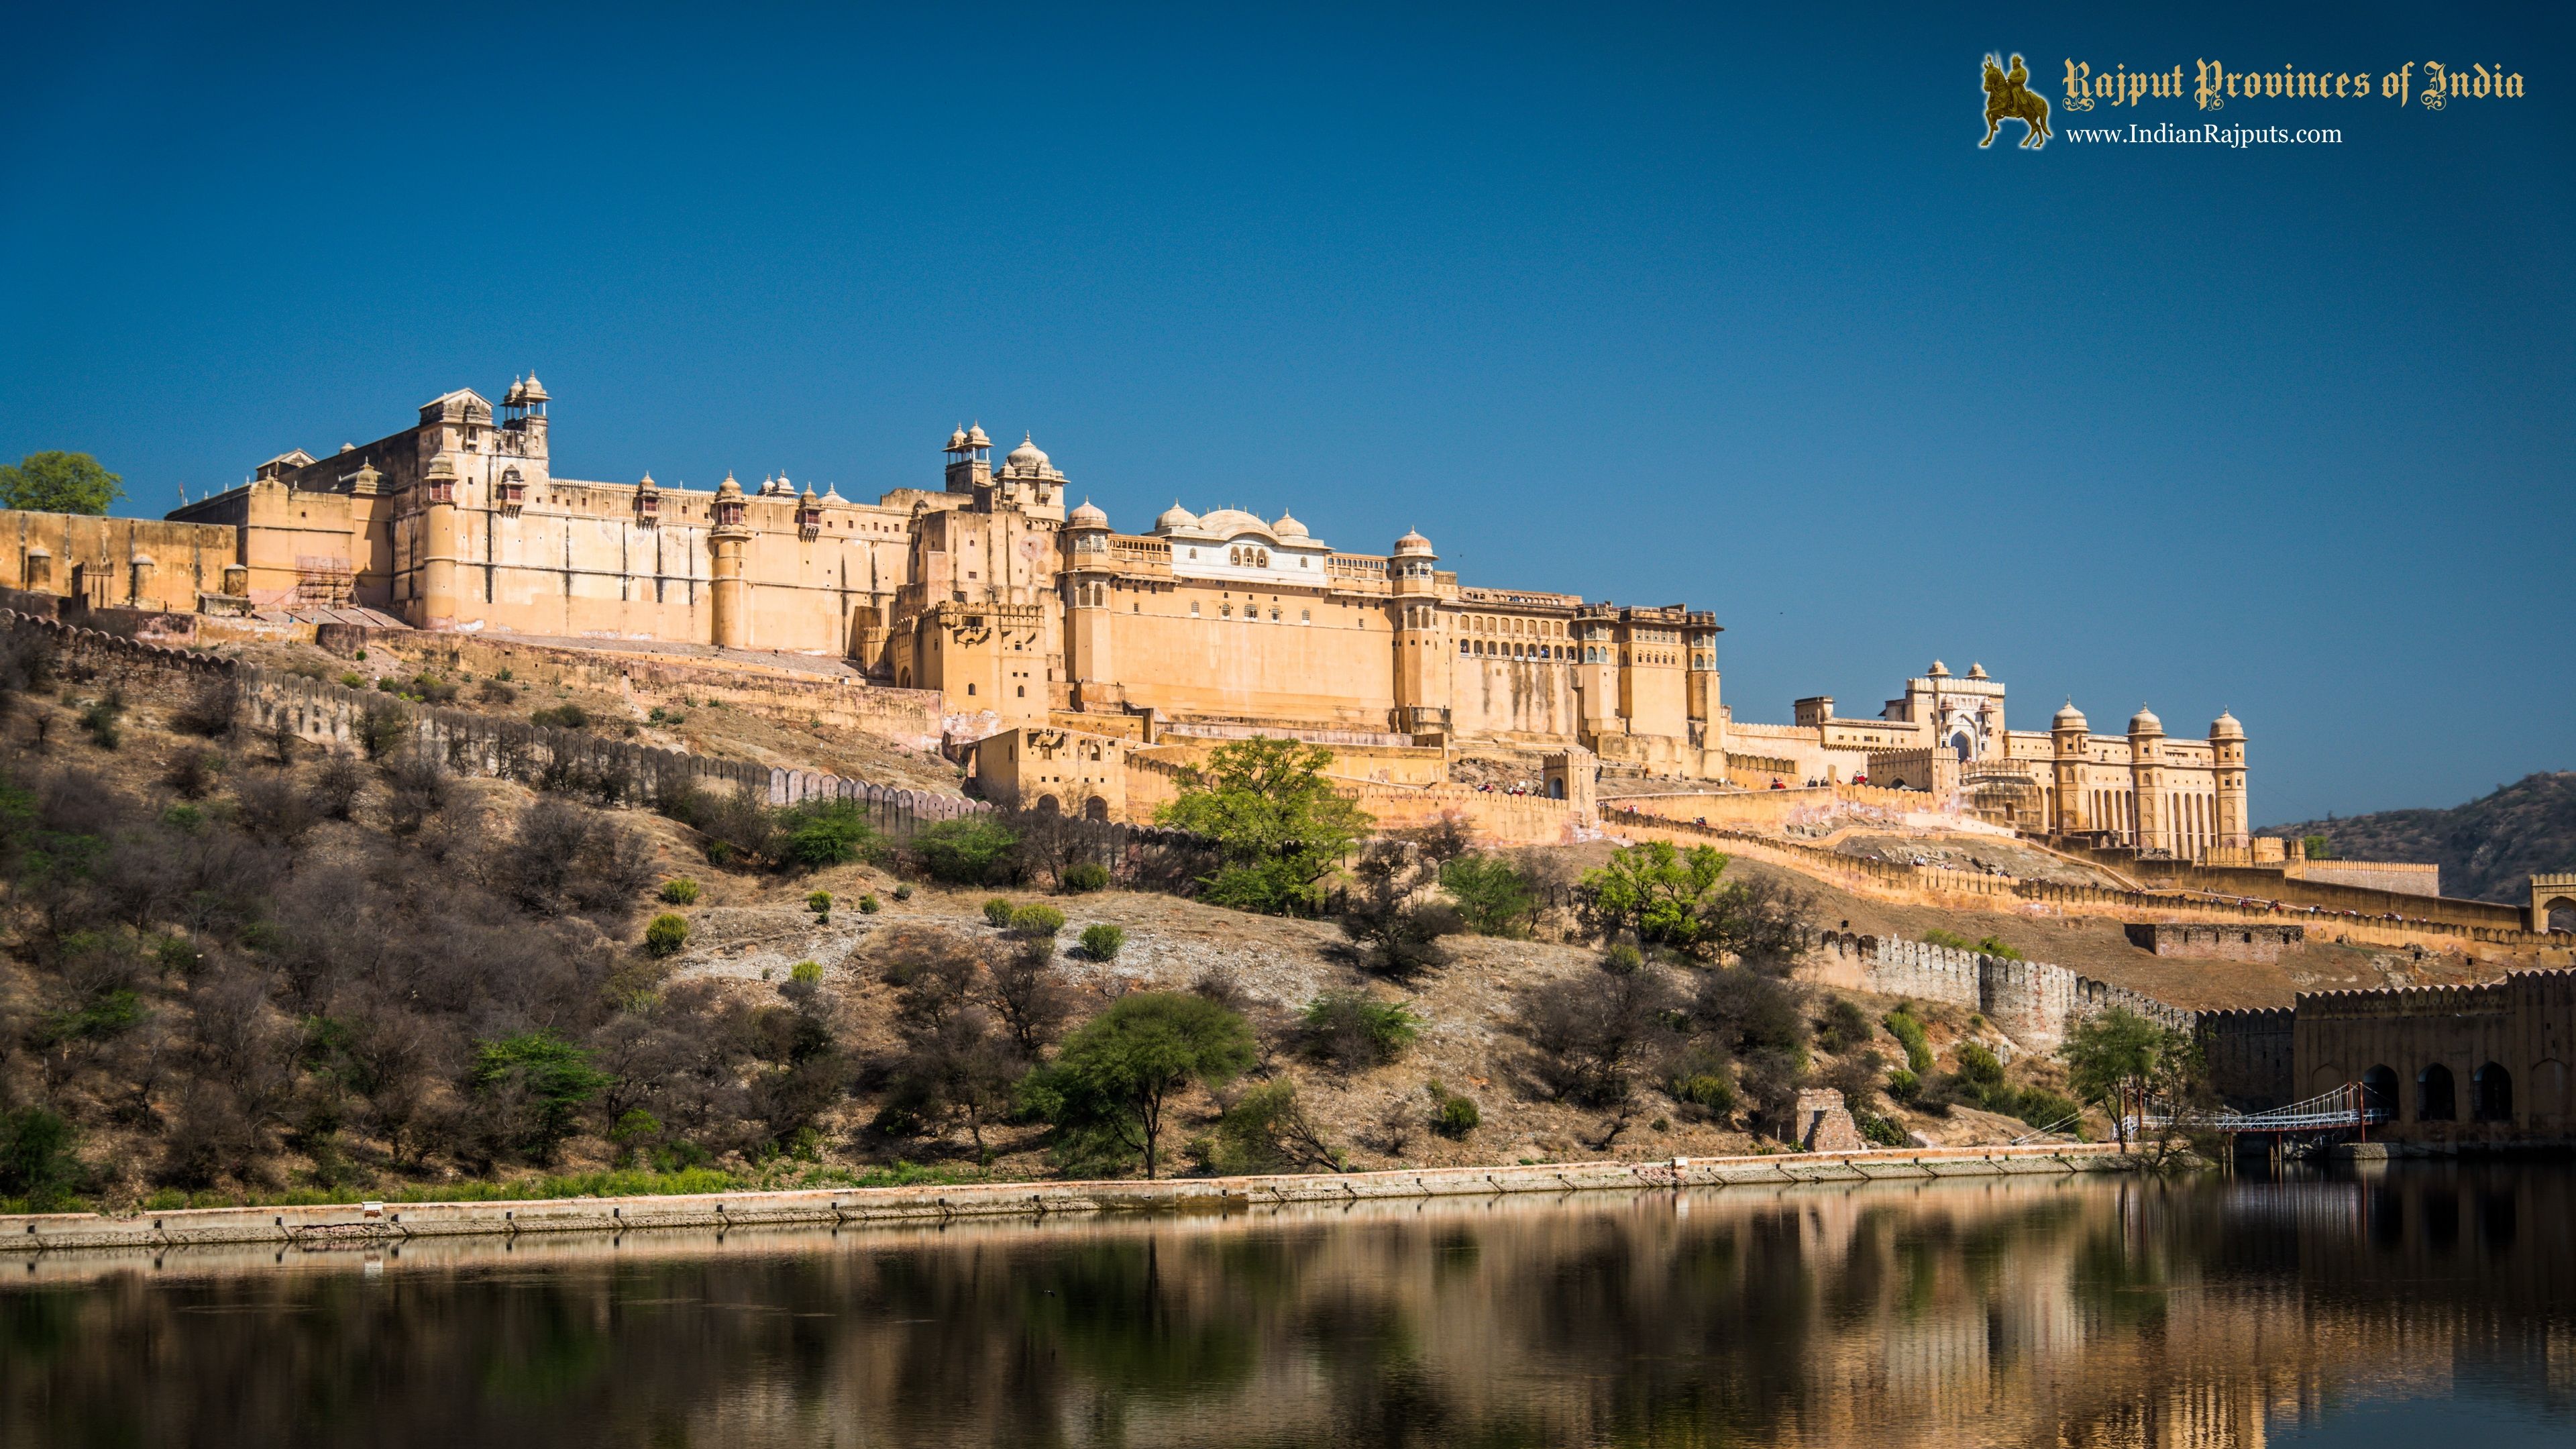 Rajput Wallpaper and Rajput Facebook Covers, Rajput Provinces of India